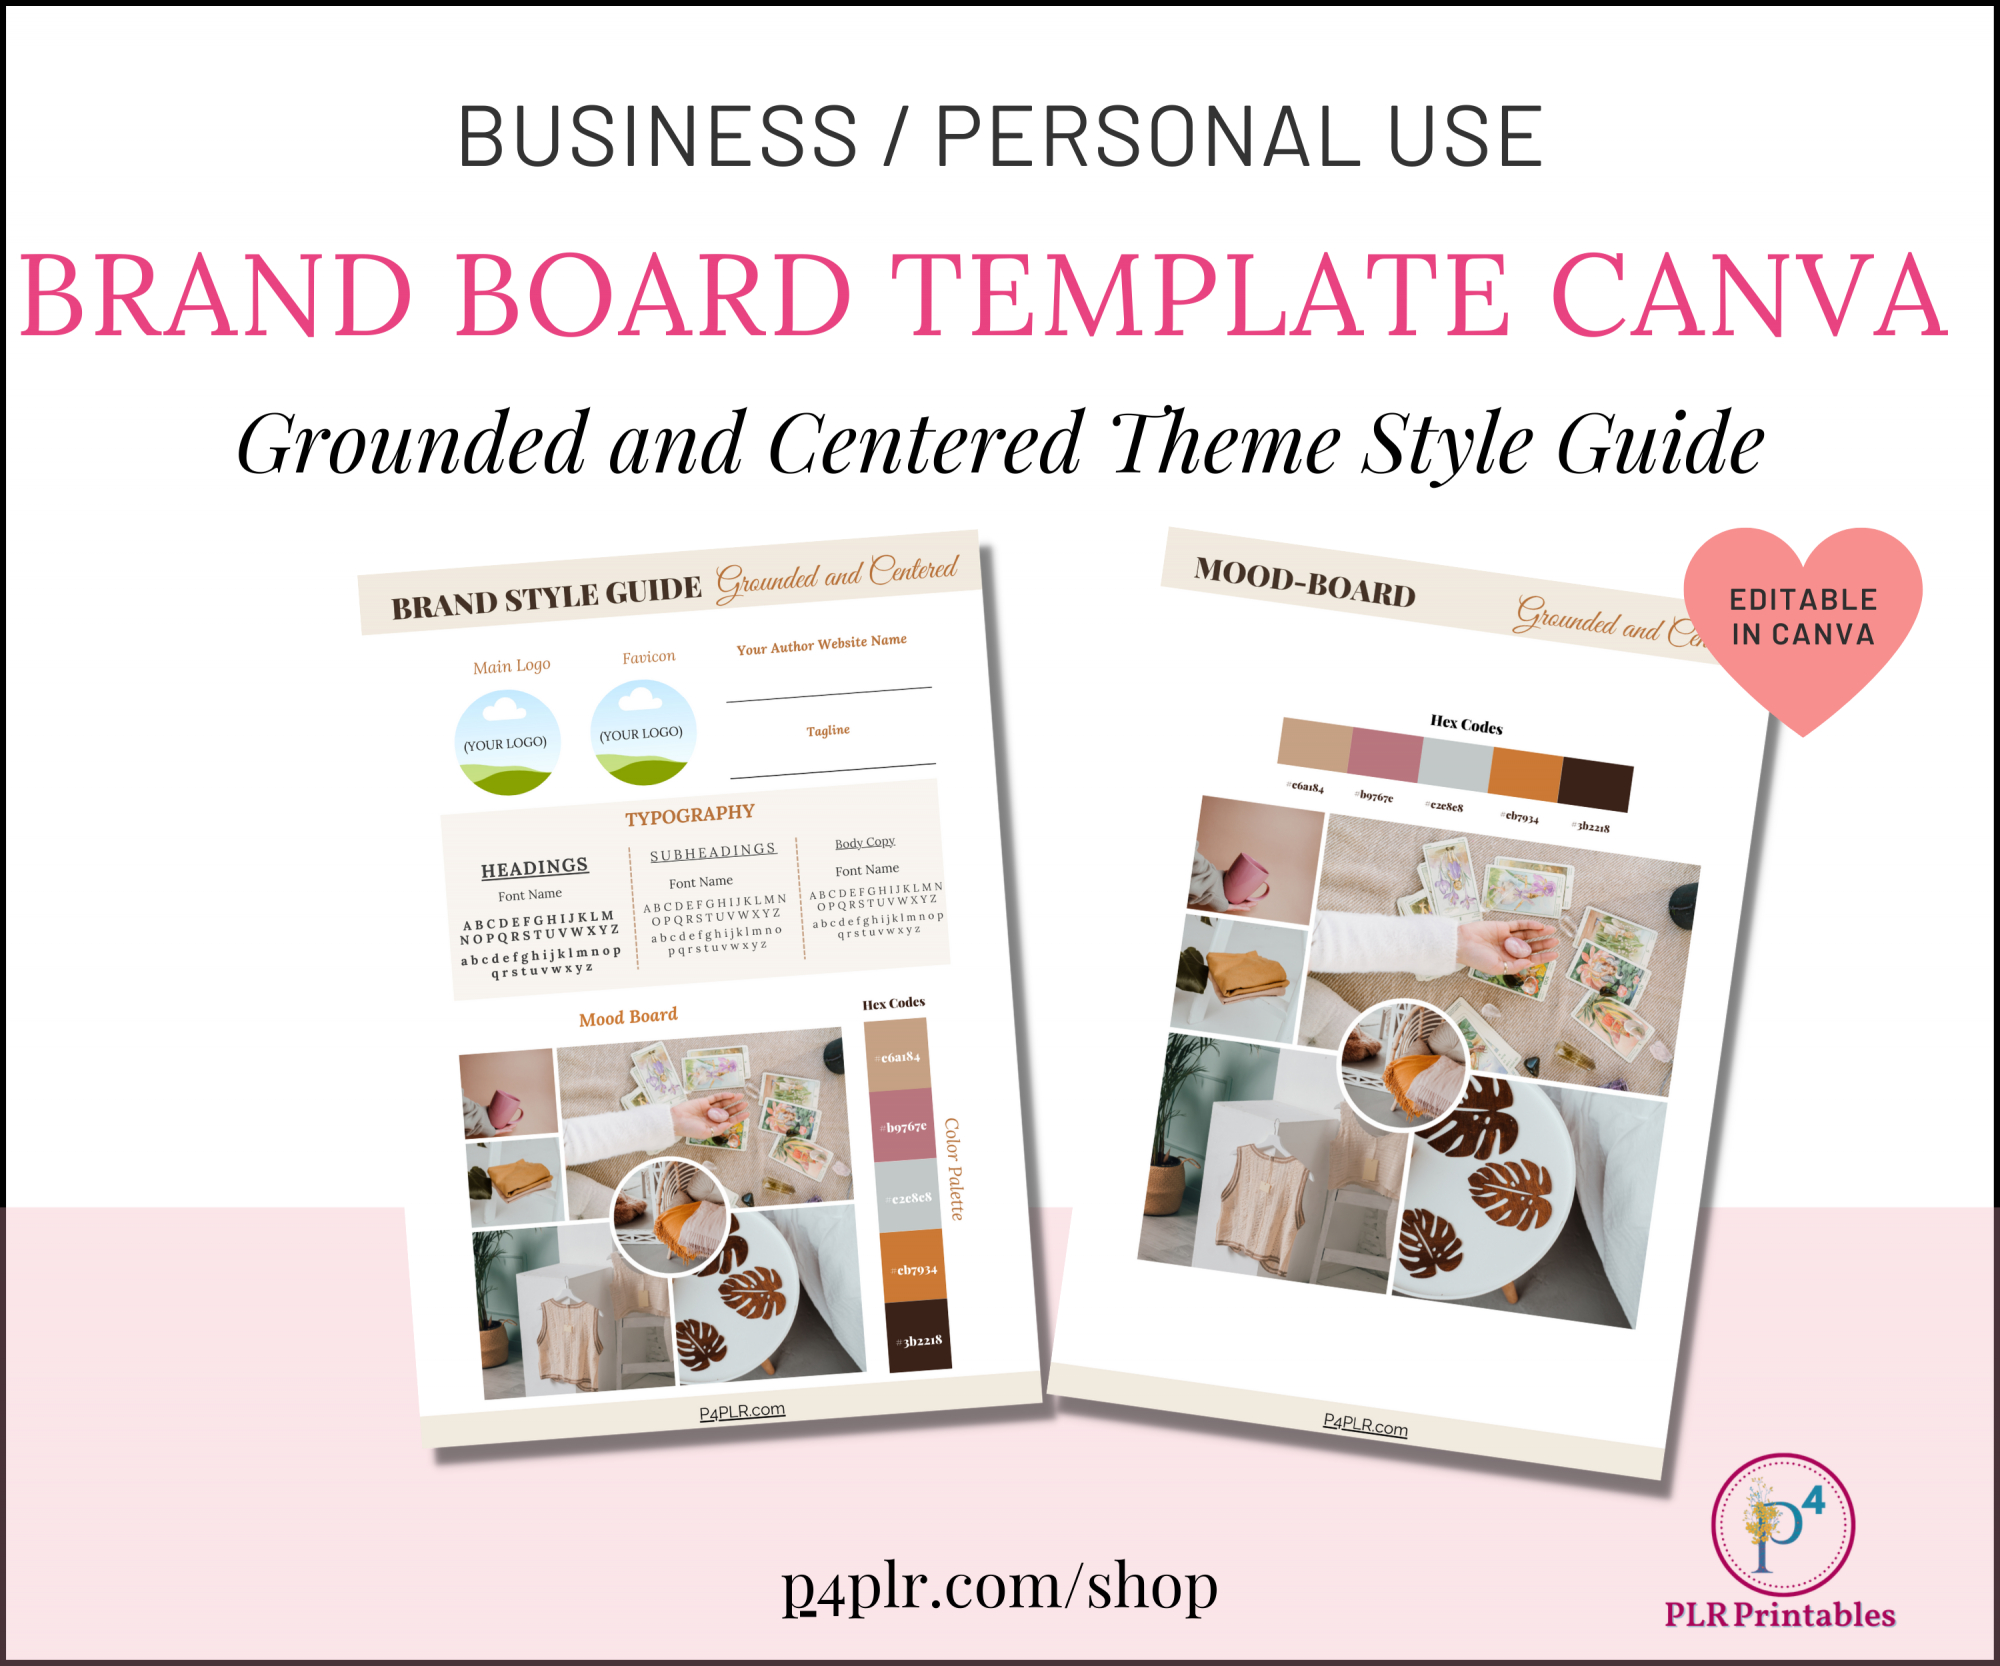 Brand kit/ board template (Canva) -Grounded and Centered